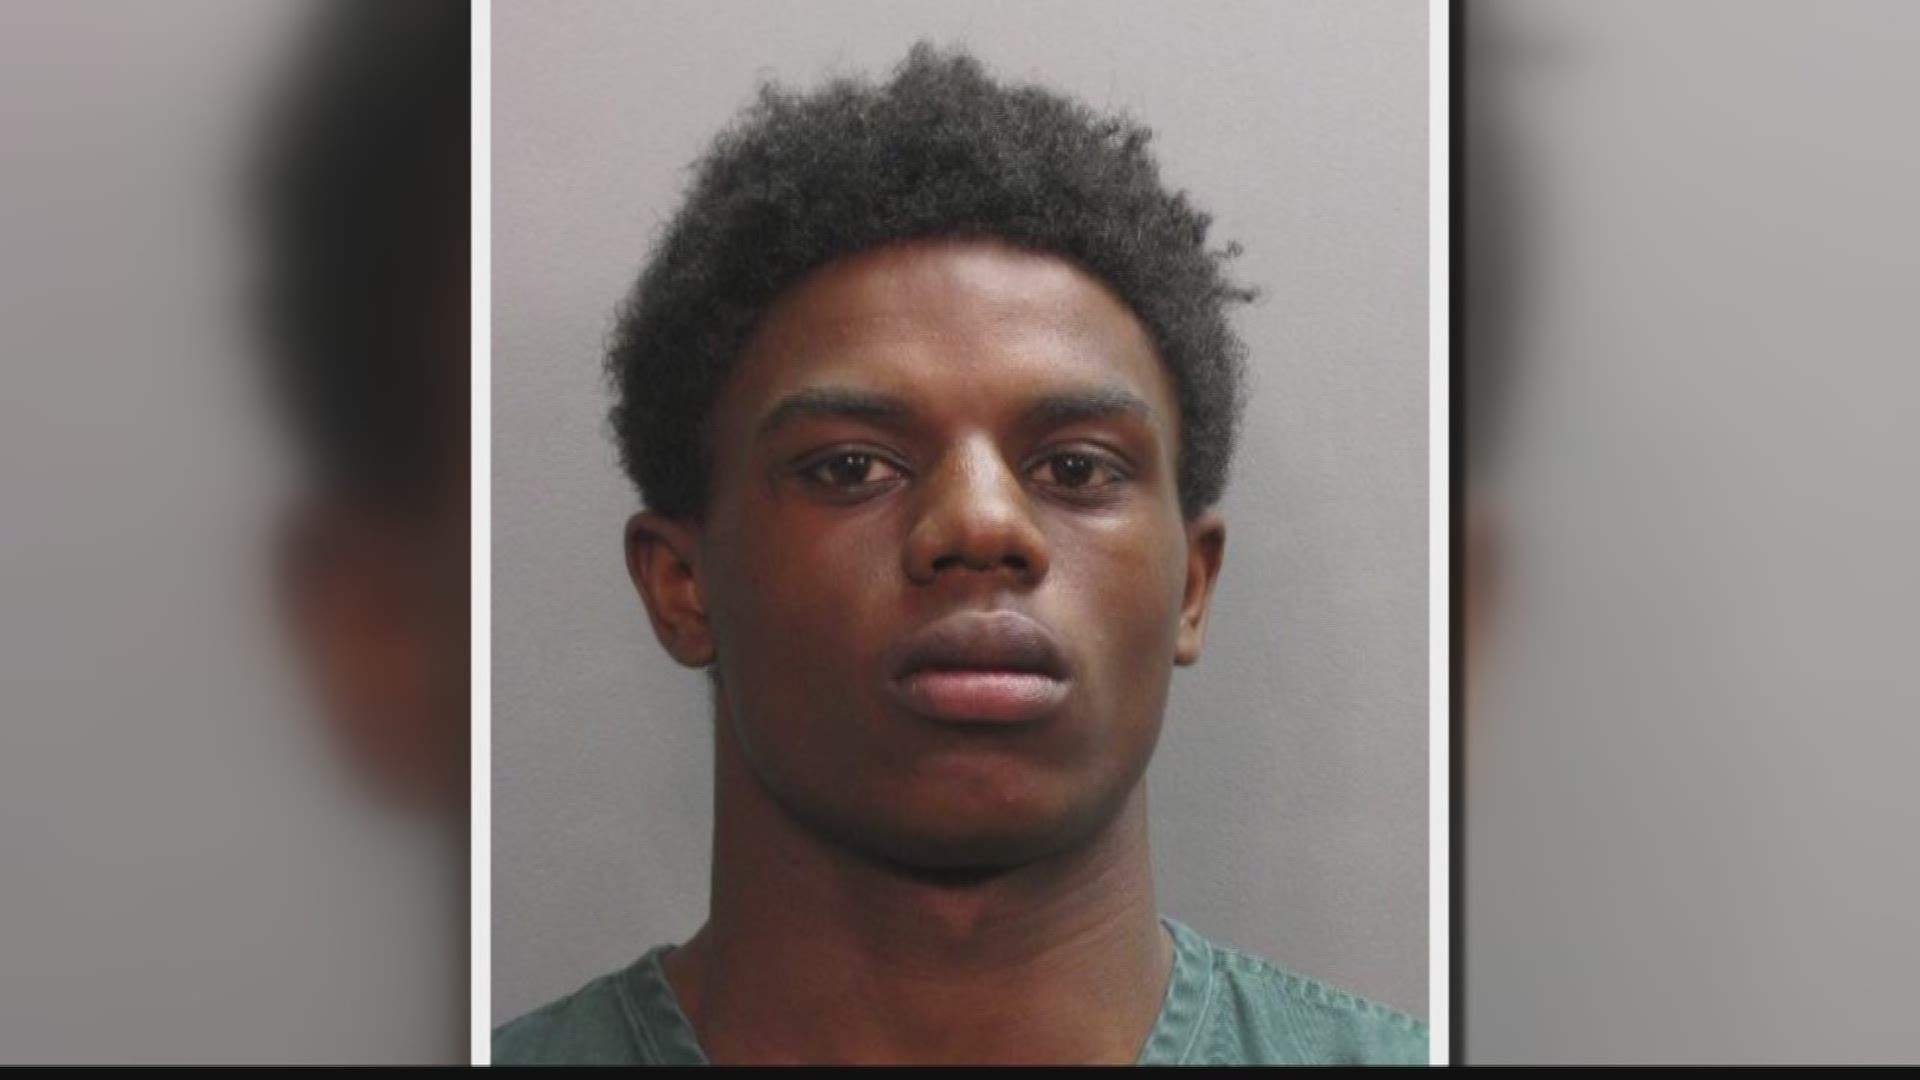 Deontrae Thomas, 19, accused of murdering 18 year old, injuring two girls, has been arrested.